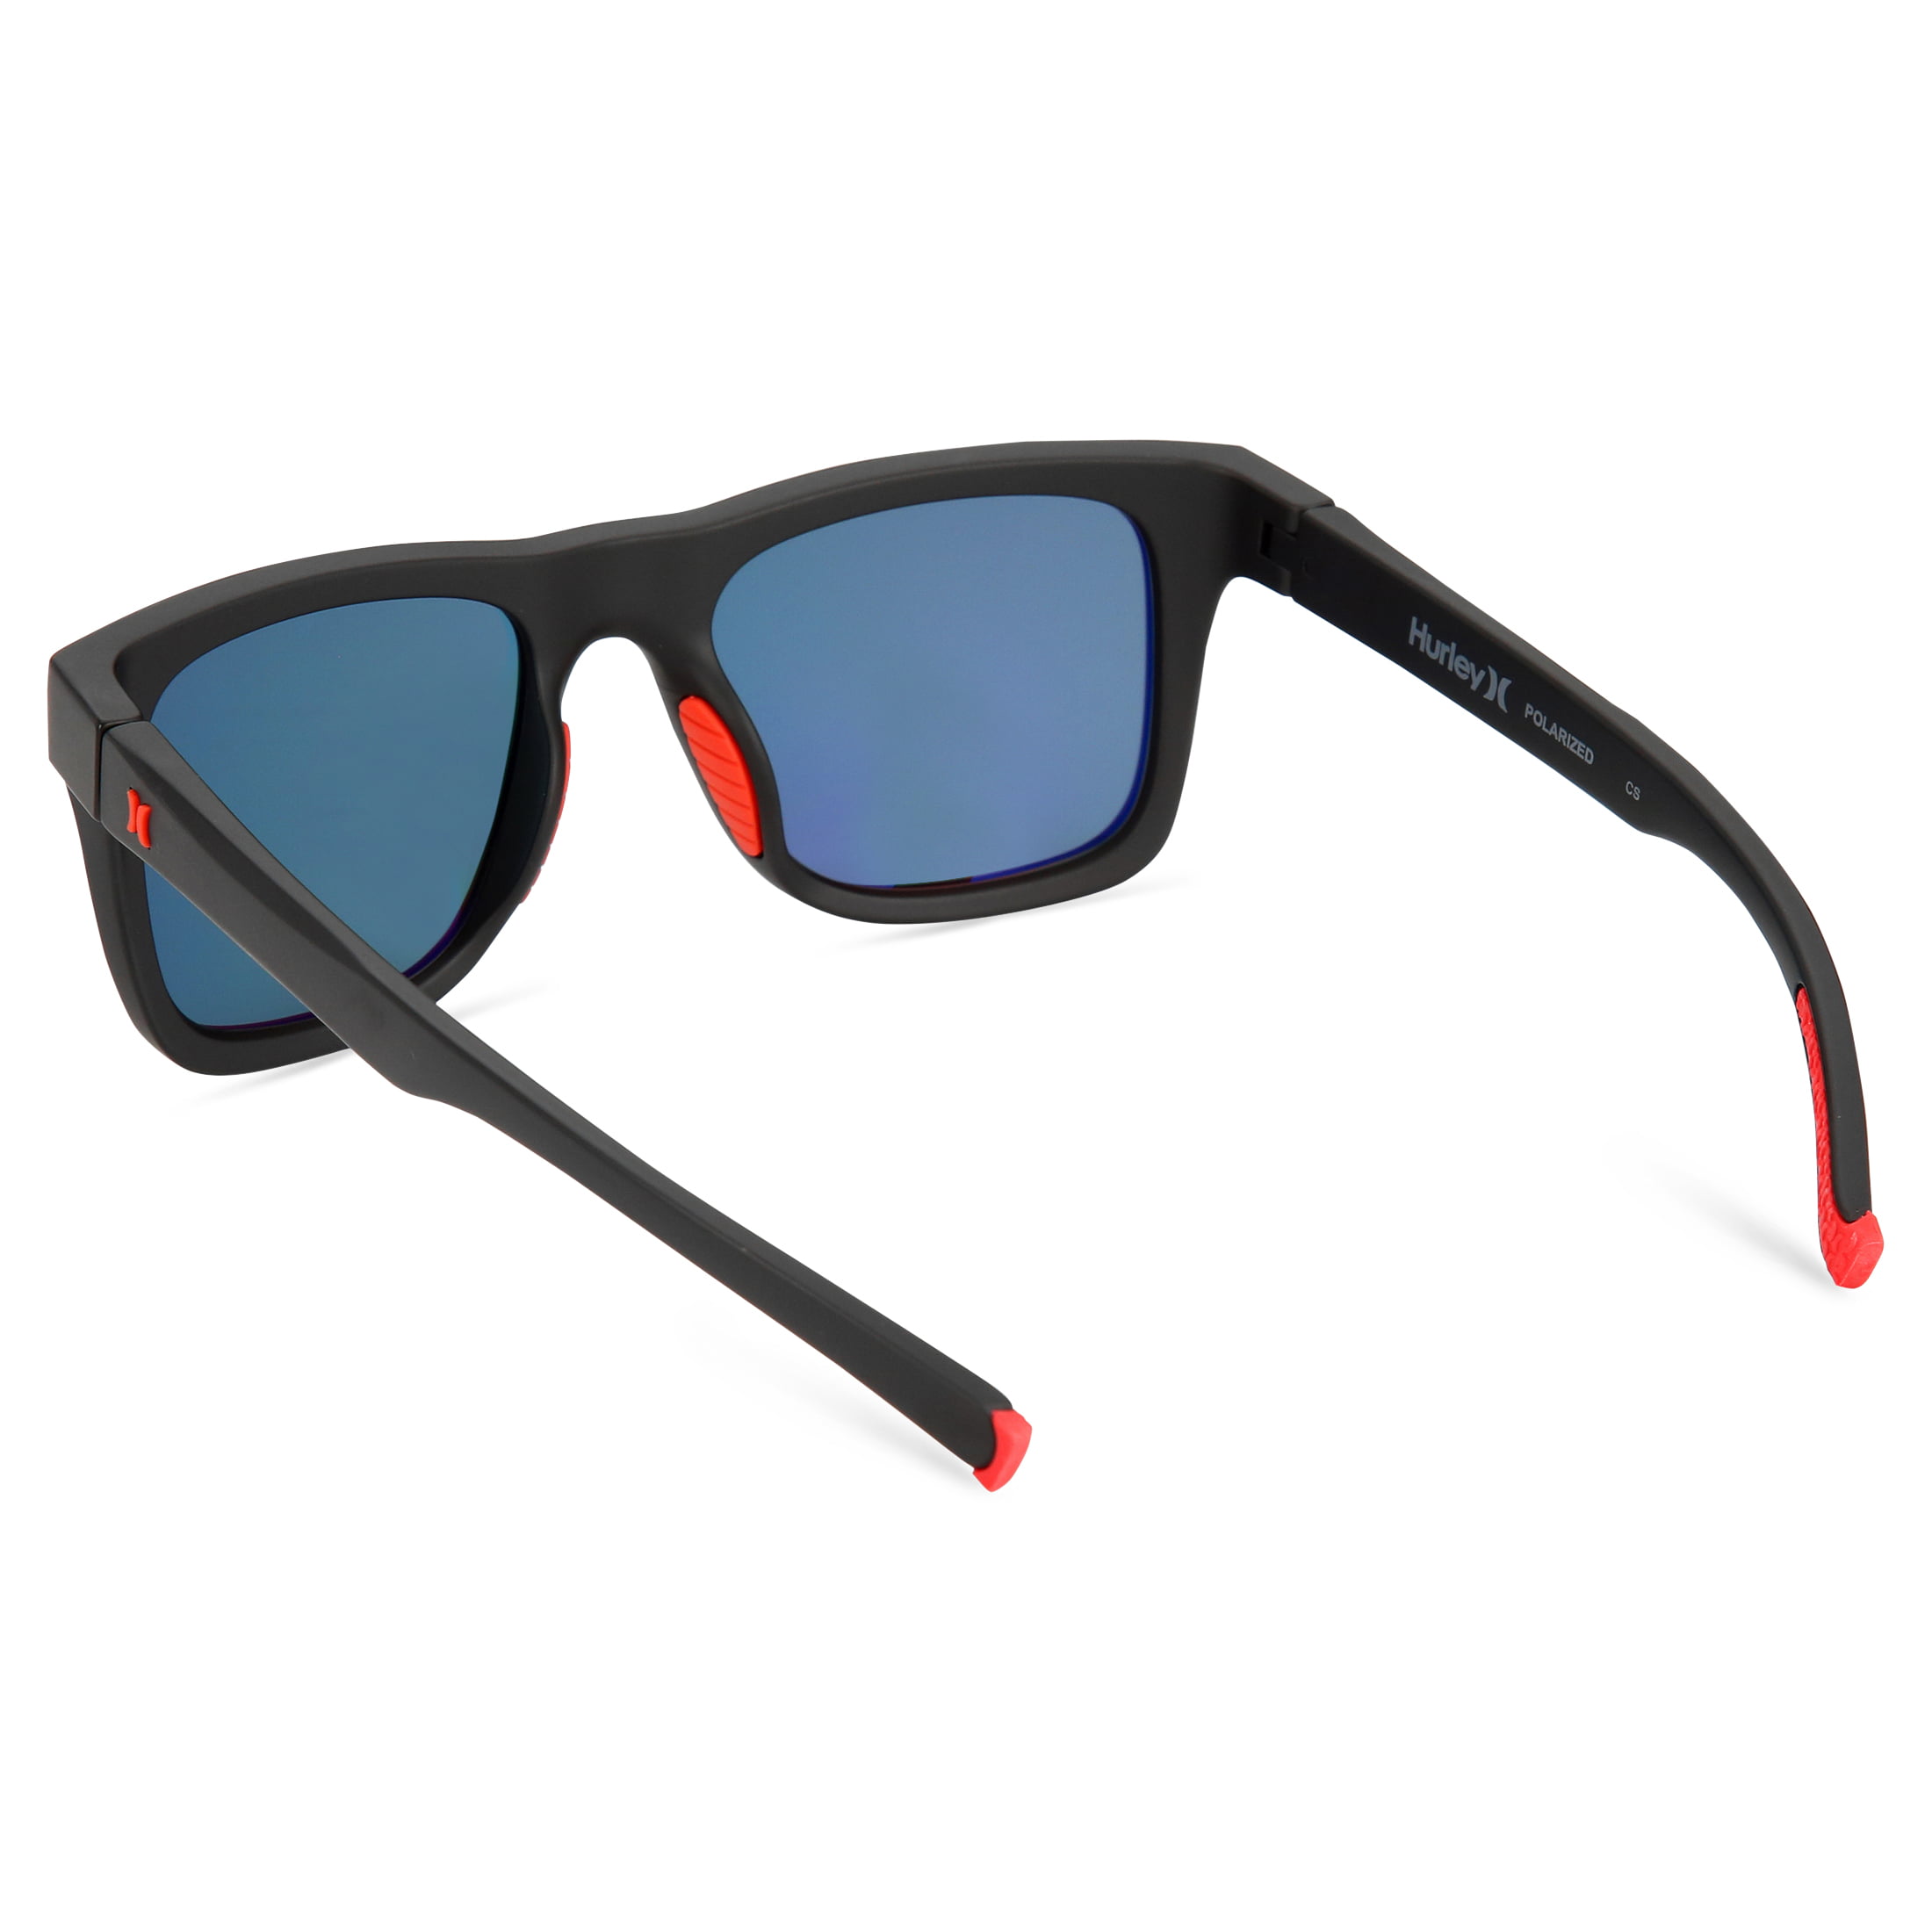 Hurley Men's Rx'able Sport Polarized Sunglasses, HSM3000P Sunrise,  Black/Red, 53-20-140, with Case